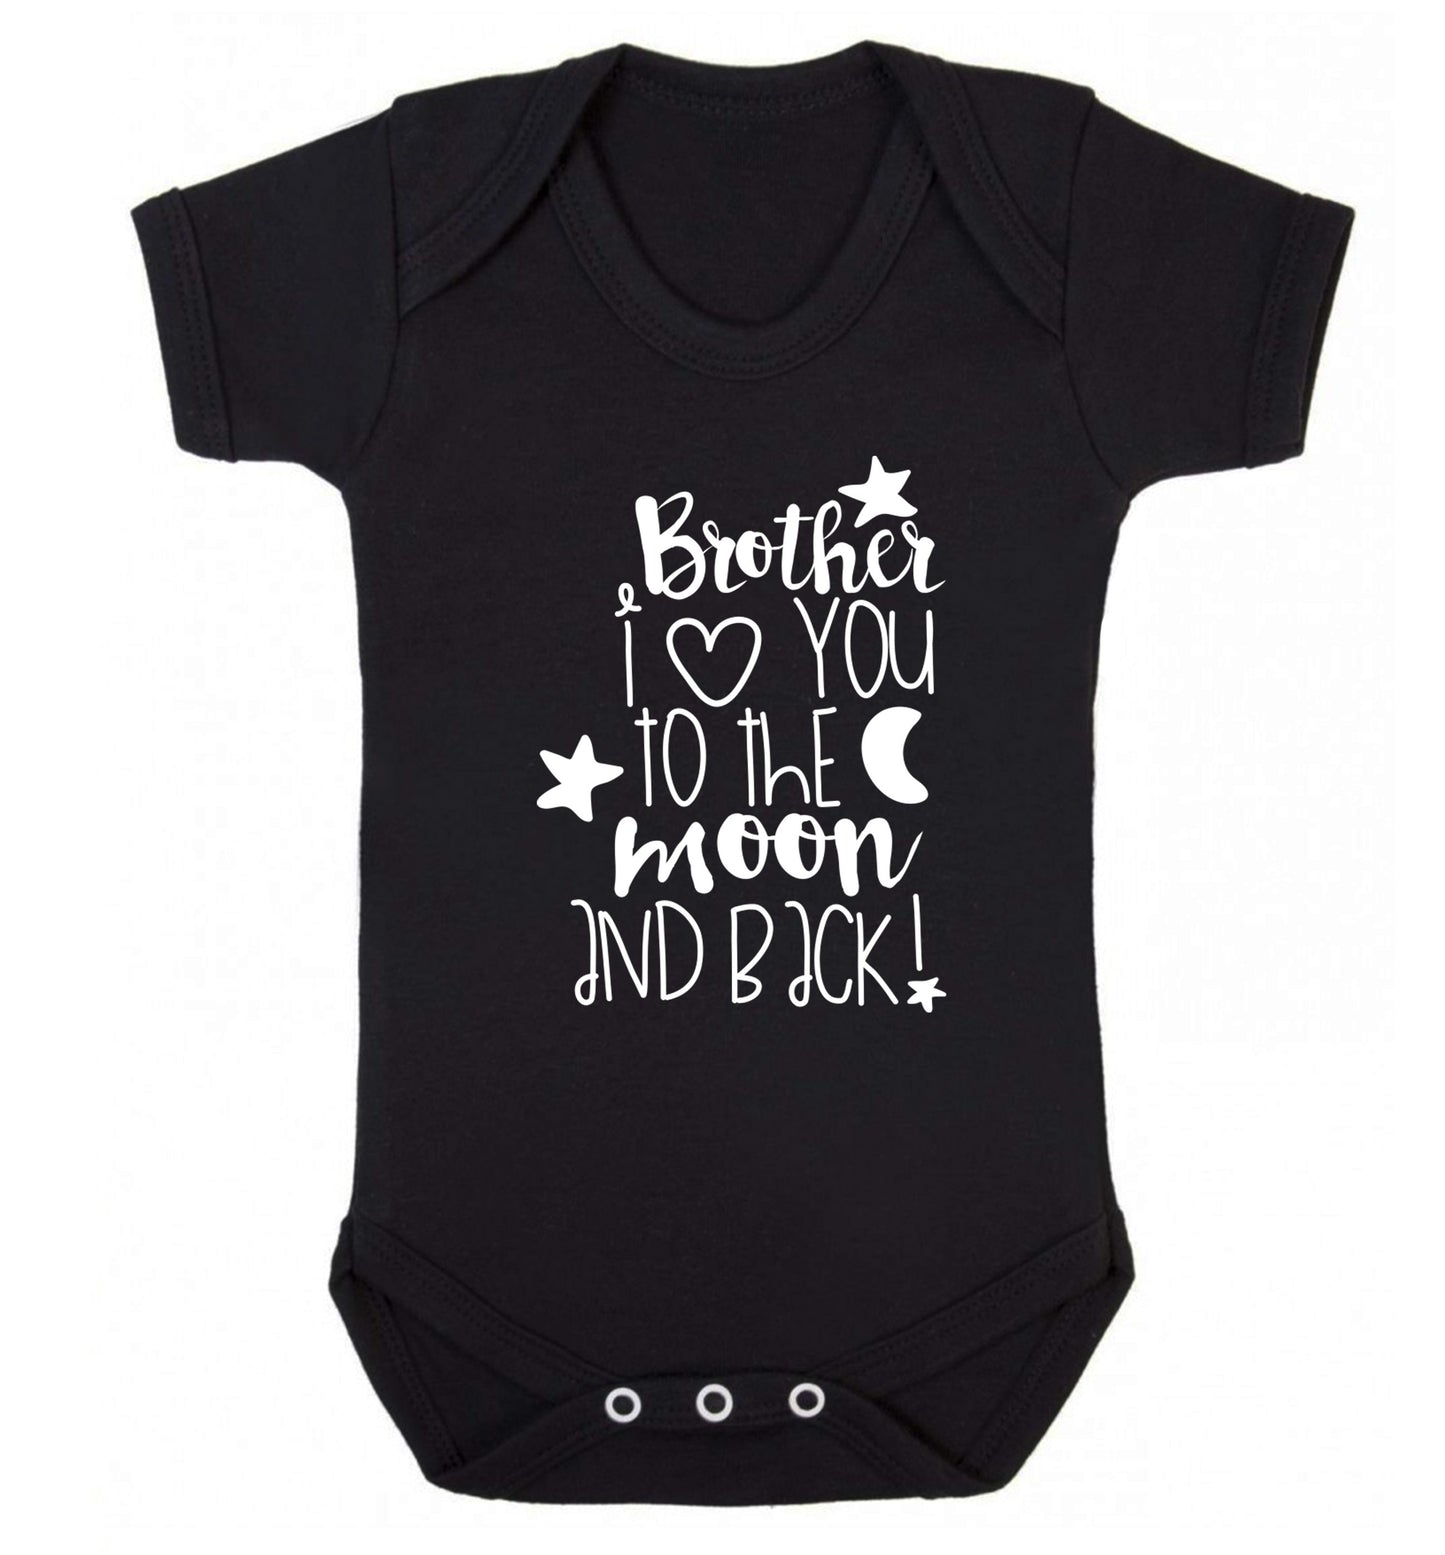 Brother I love you to the moon and back Baby Vest black 18-24 months